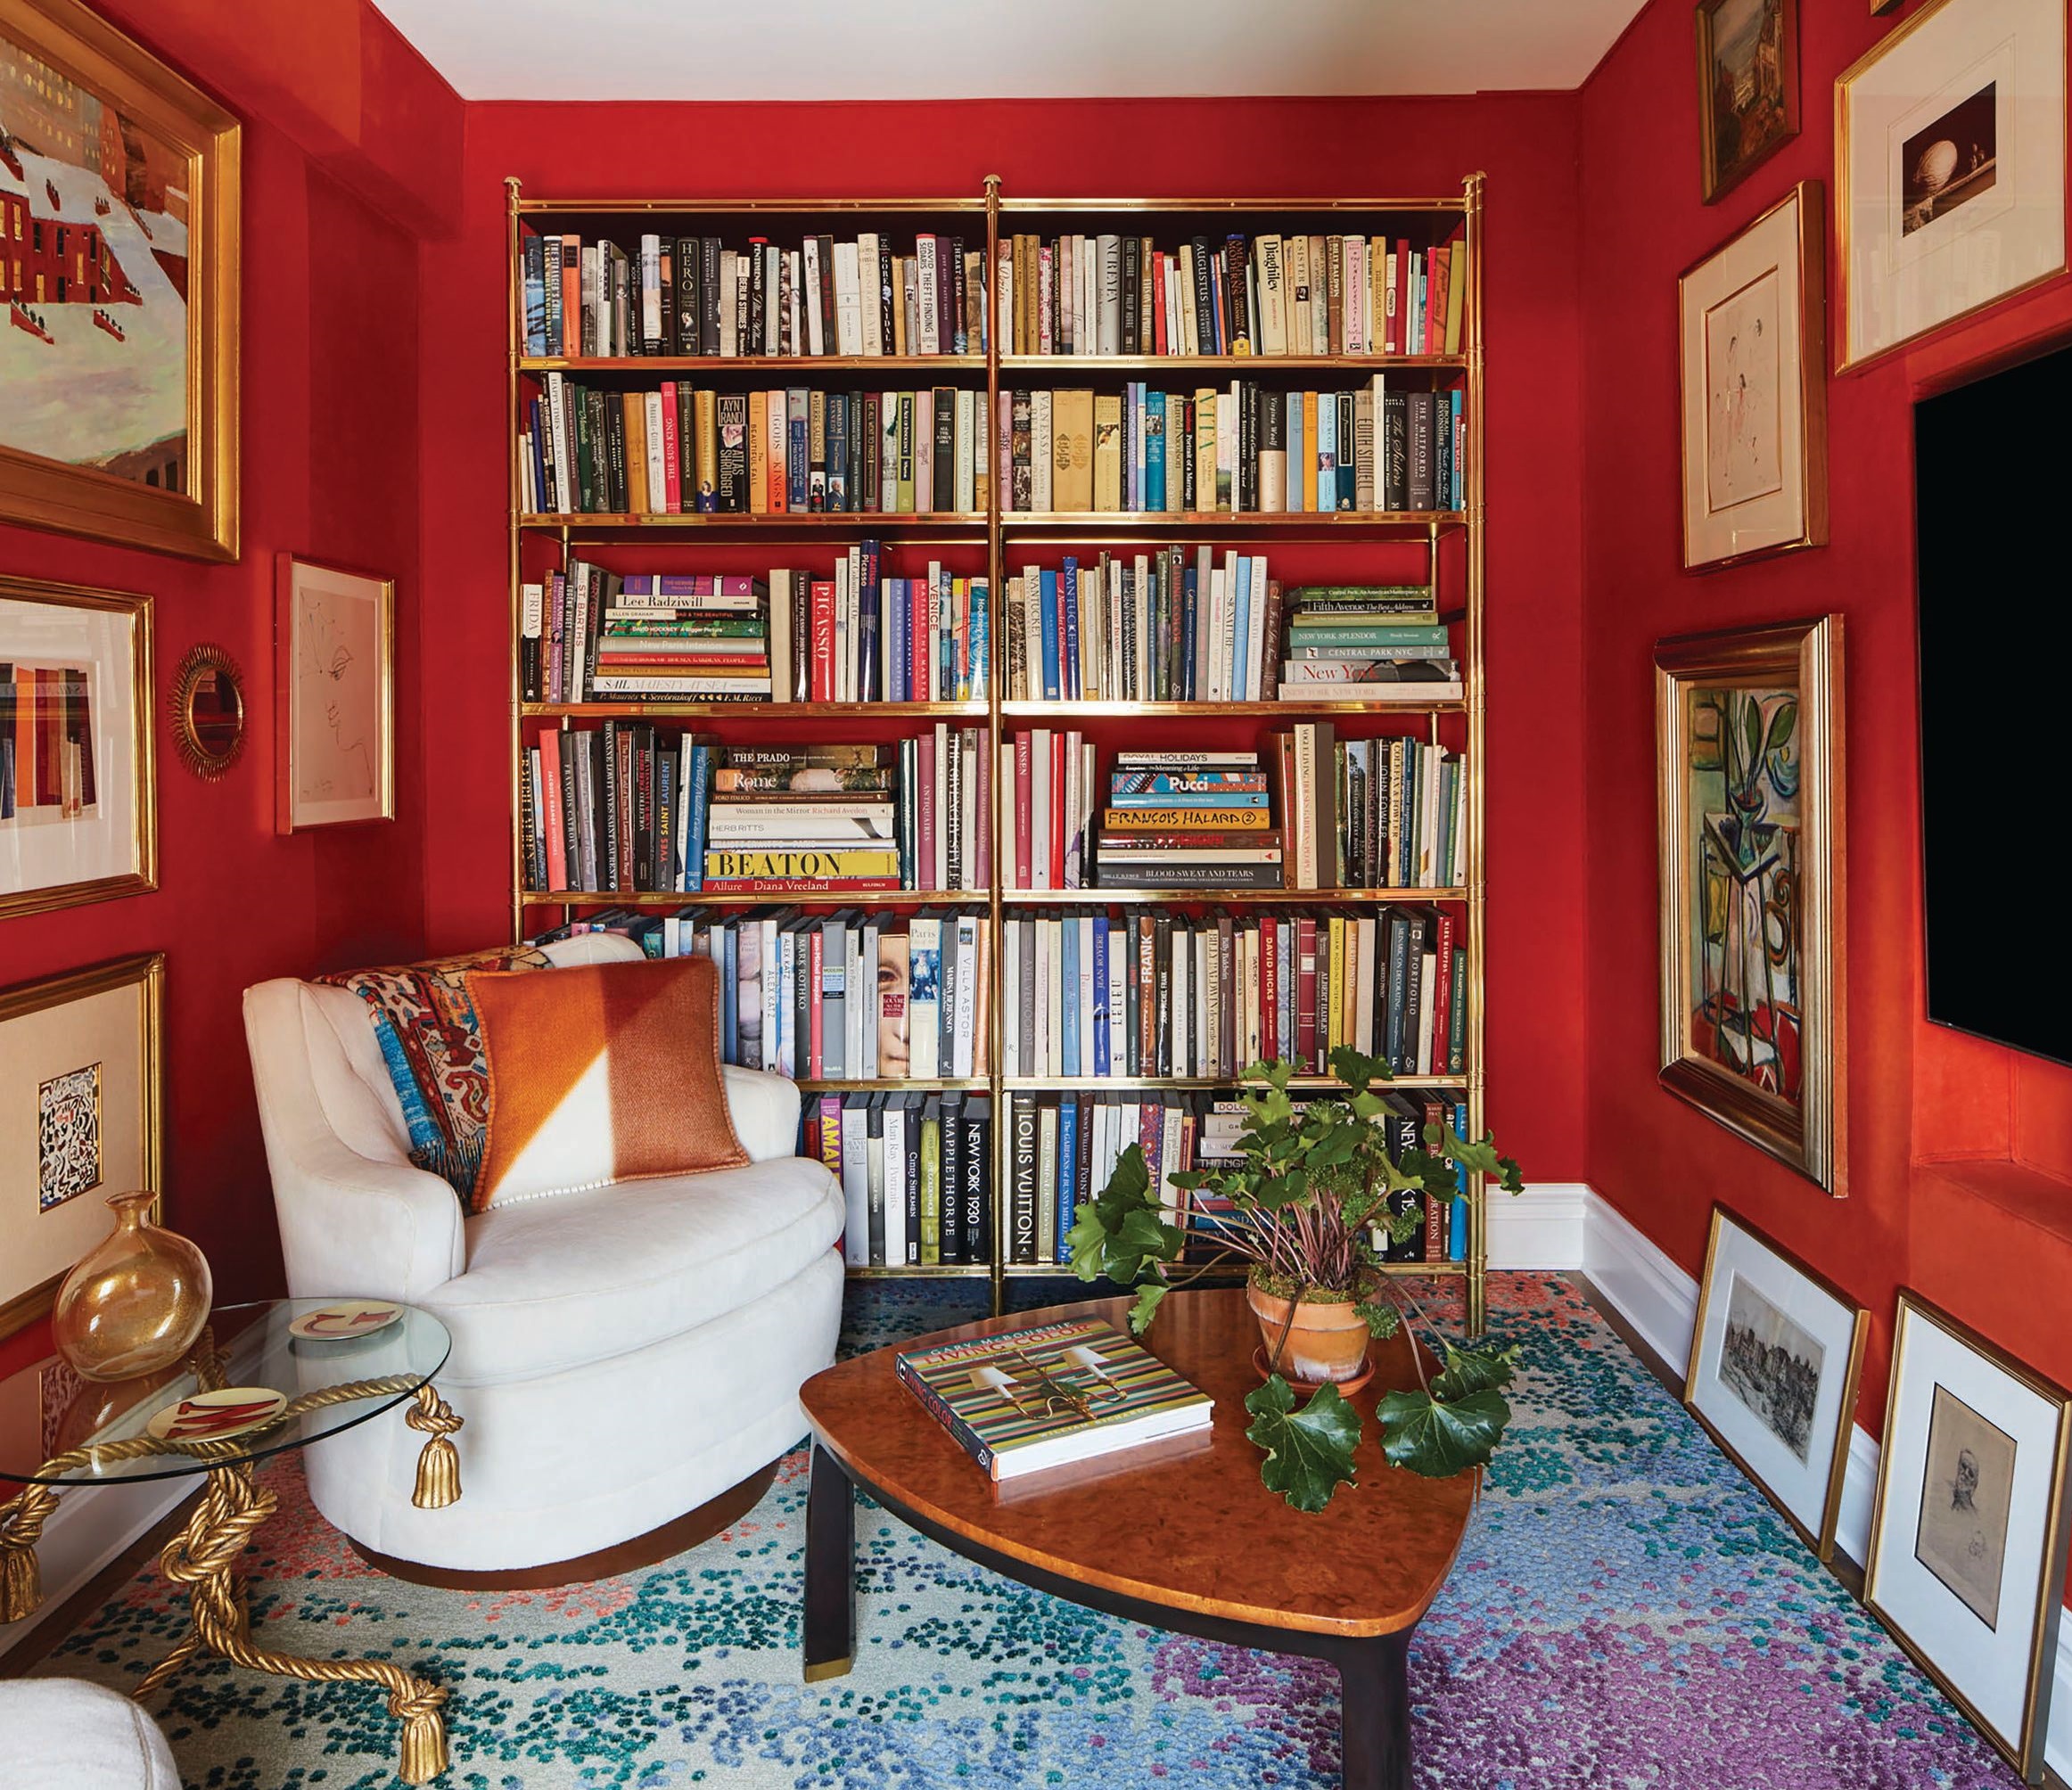 A Frederick P. Victoria & Son bookcase in the TV room. PHOTOGRAPHED BY ANNIE SCHLECTER